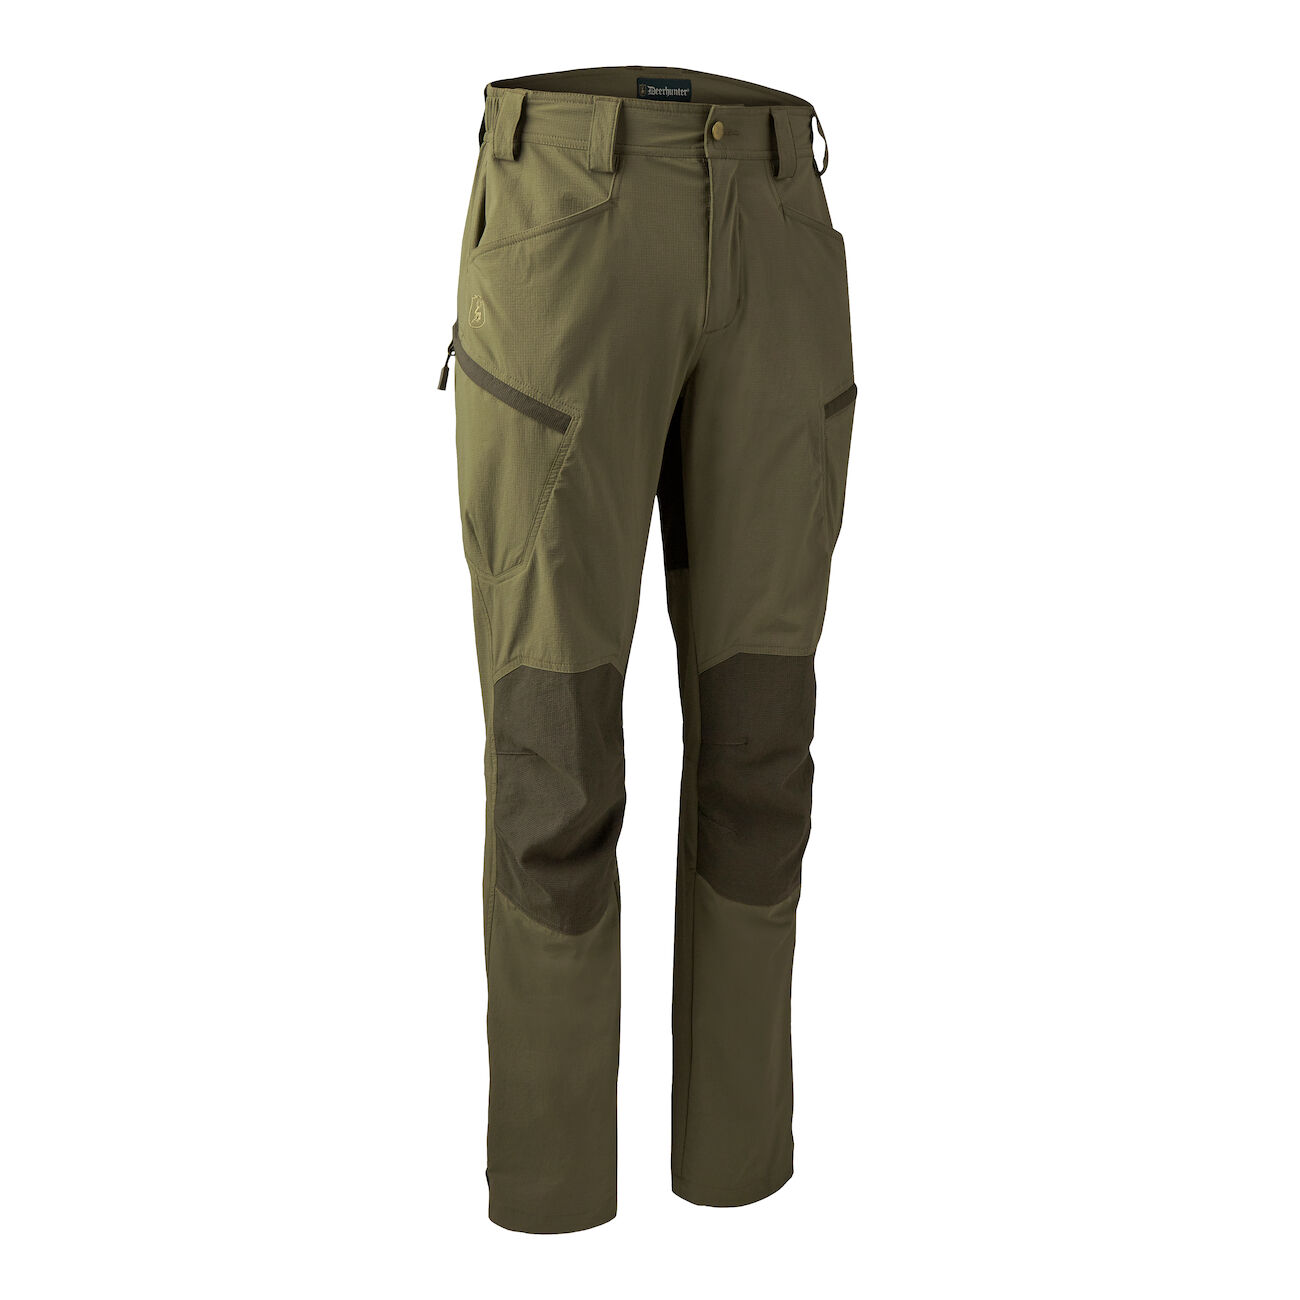 Deerhunter Anti Insect trouser capers